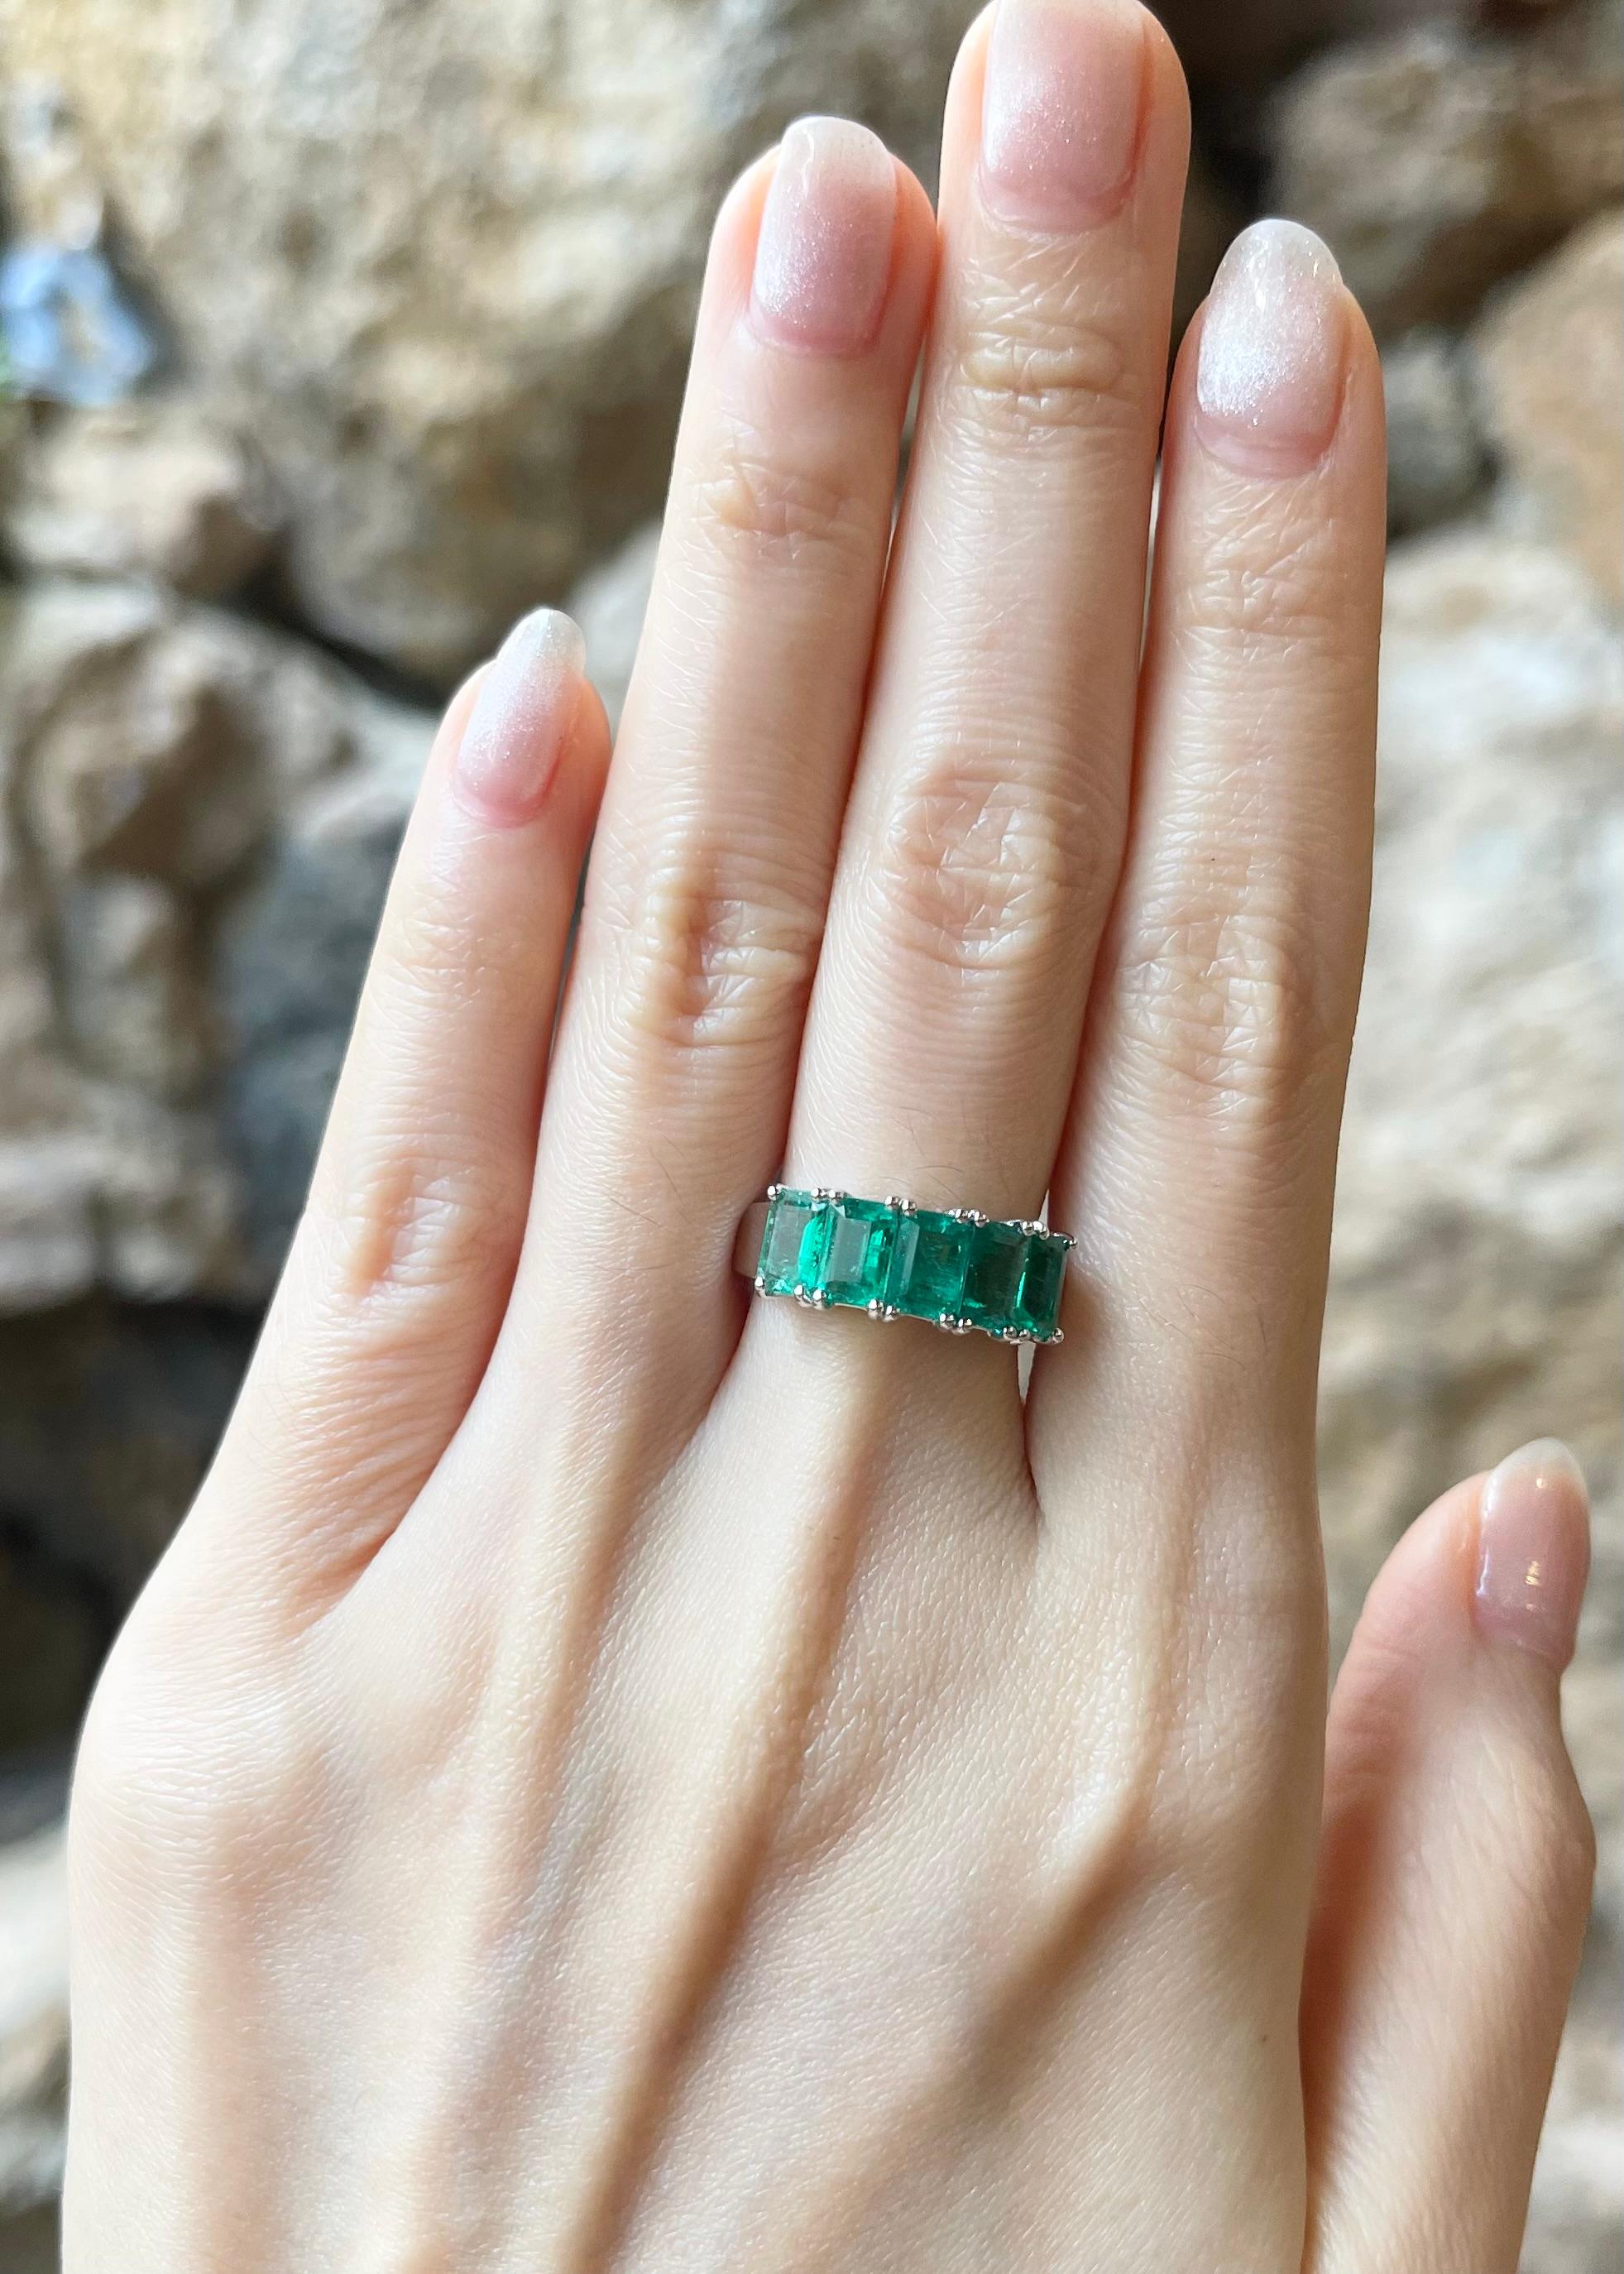 Emerald 2.50 carats Ring set in 18K White Gold Settings

Width:  1.7 cm 
Length: 0.6 cm
Ring Size: 54
Total Weight: 4.51 grams

